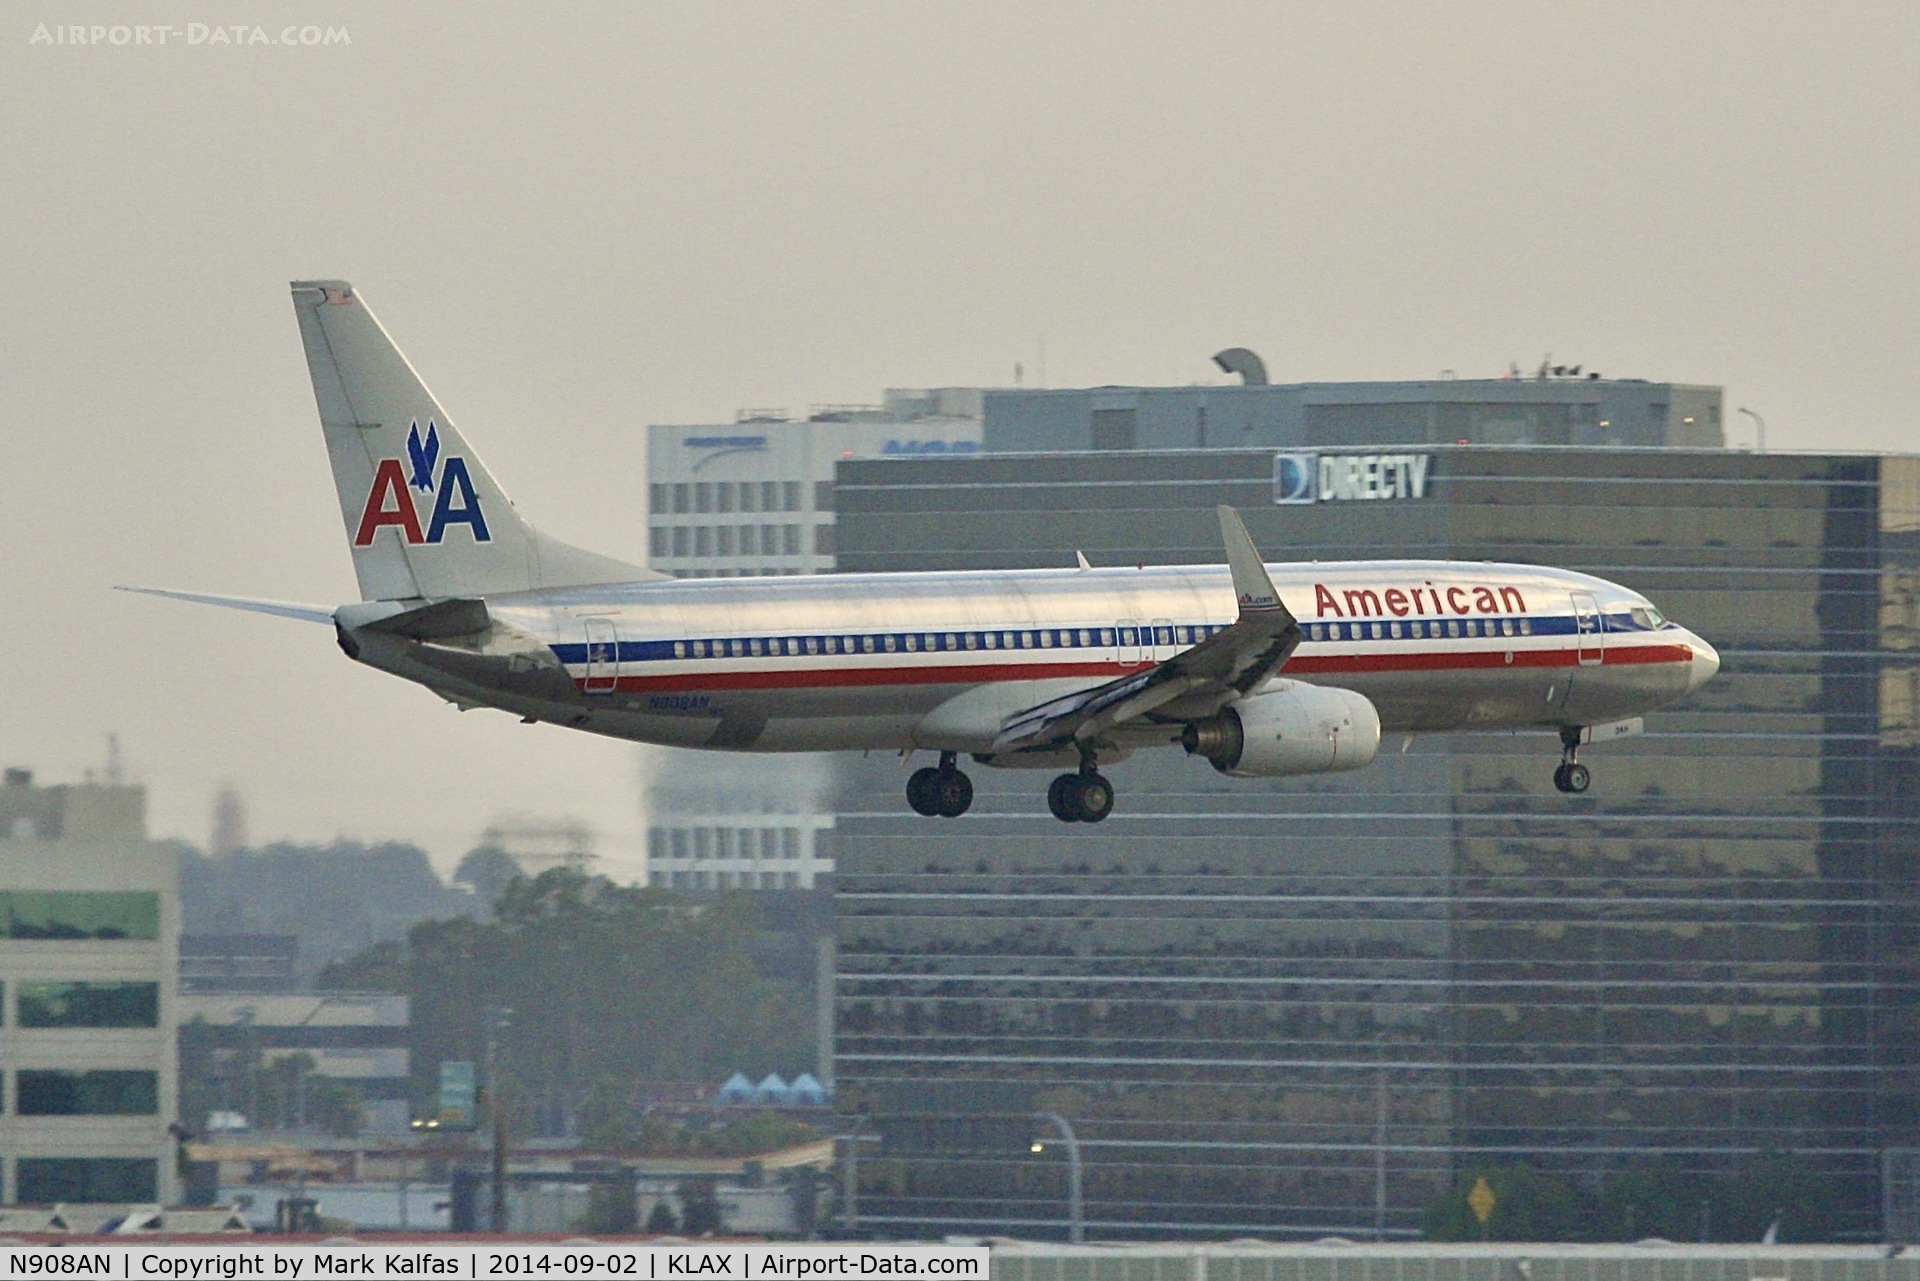 N908AN, 1999 Boeing 737-823 C/N 29510, American Boeing 737-823, N908AN on approach to 25L LAX